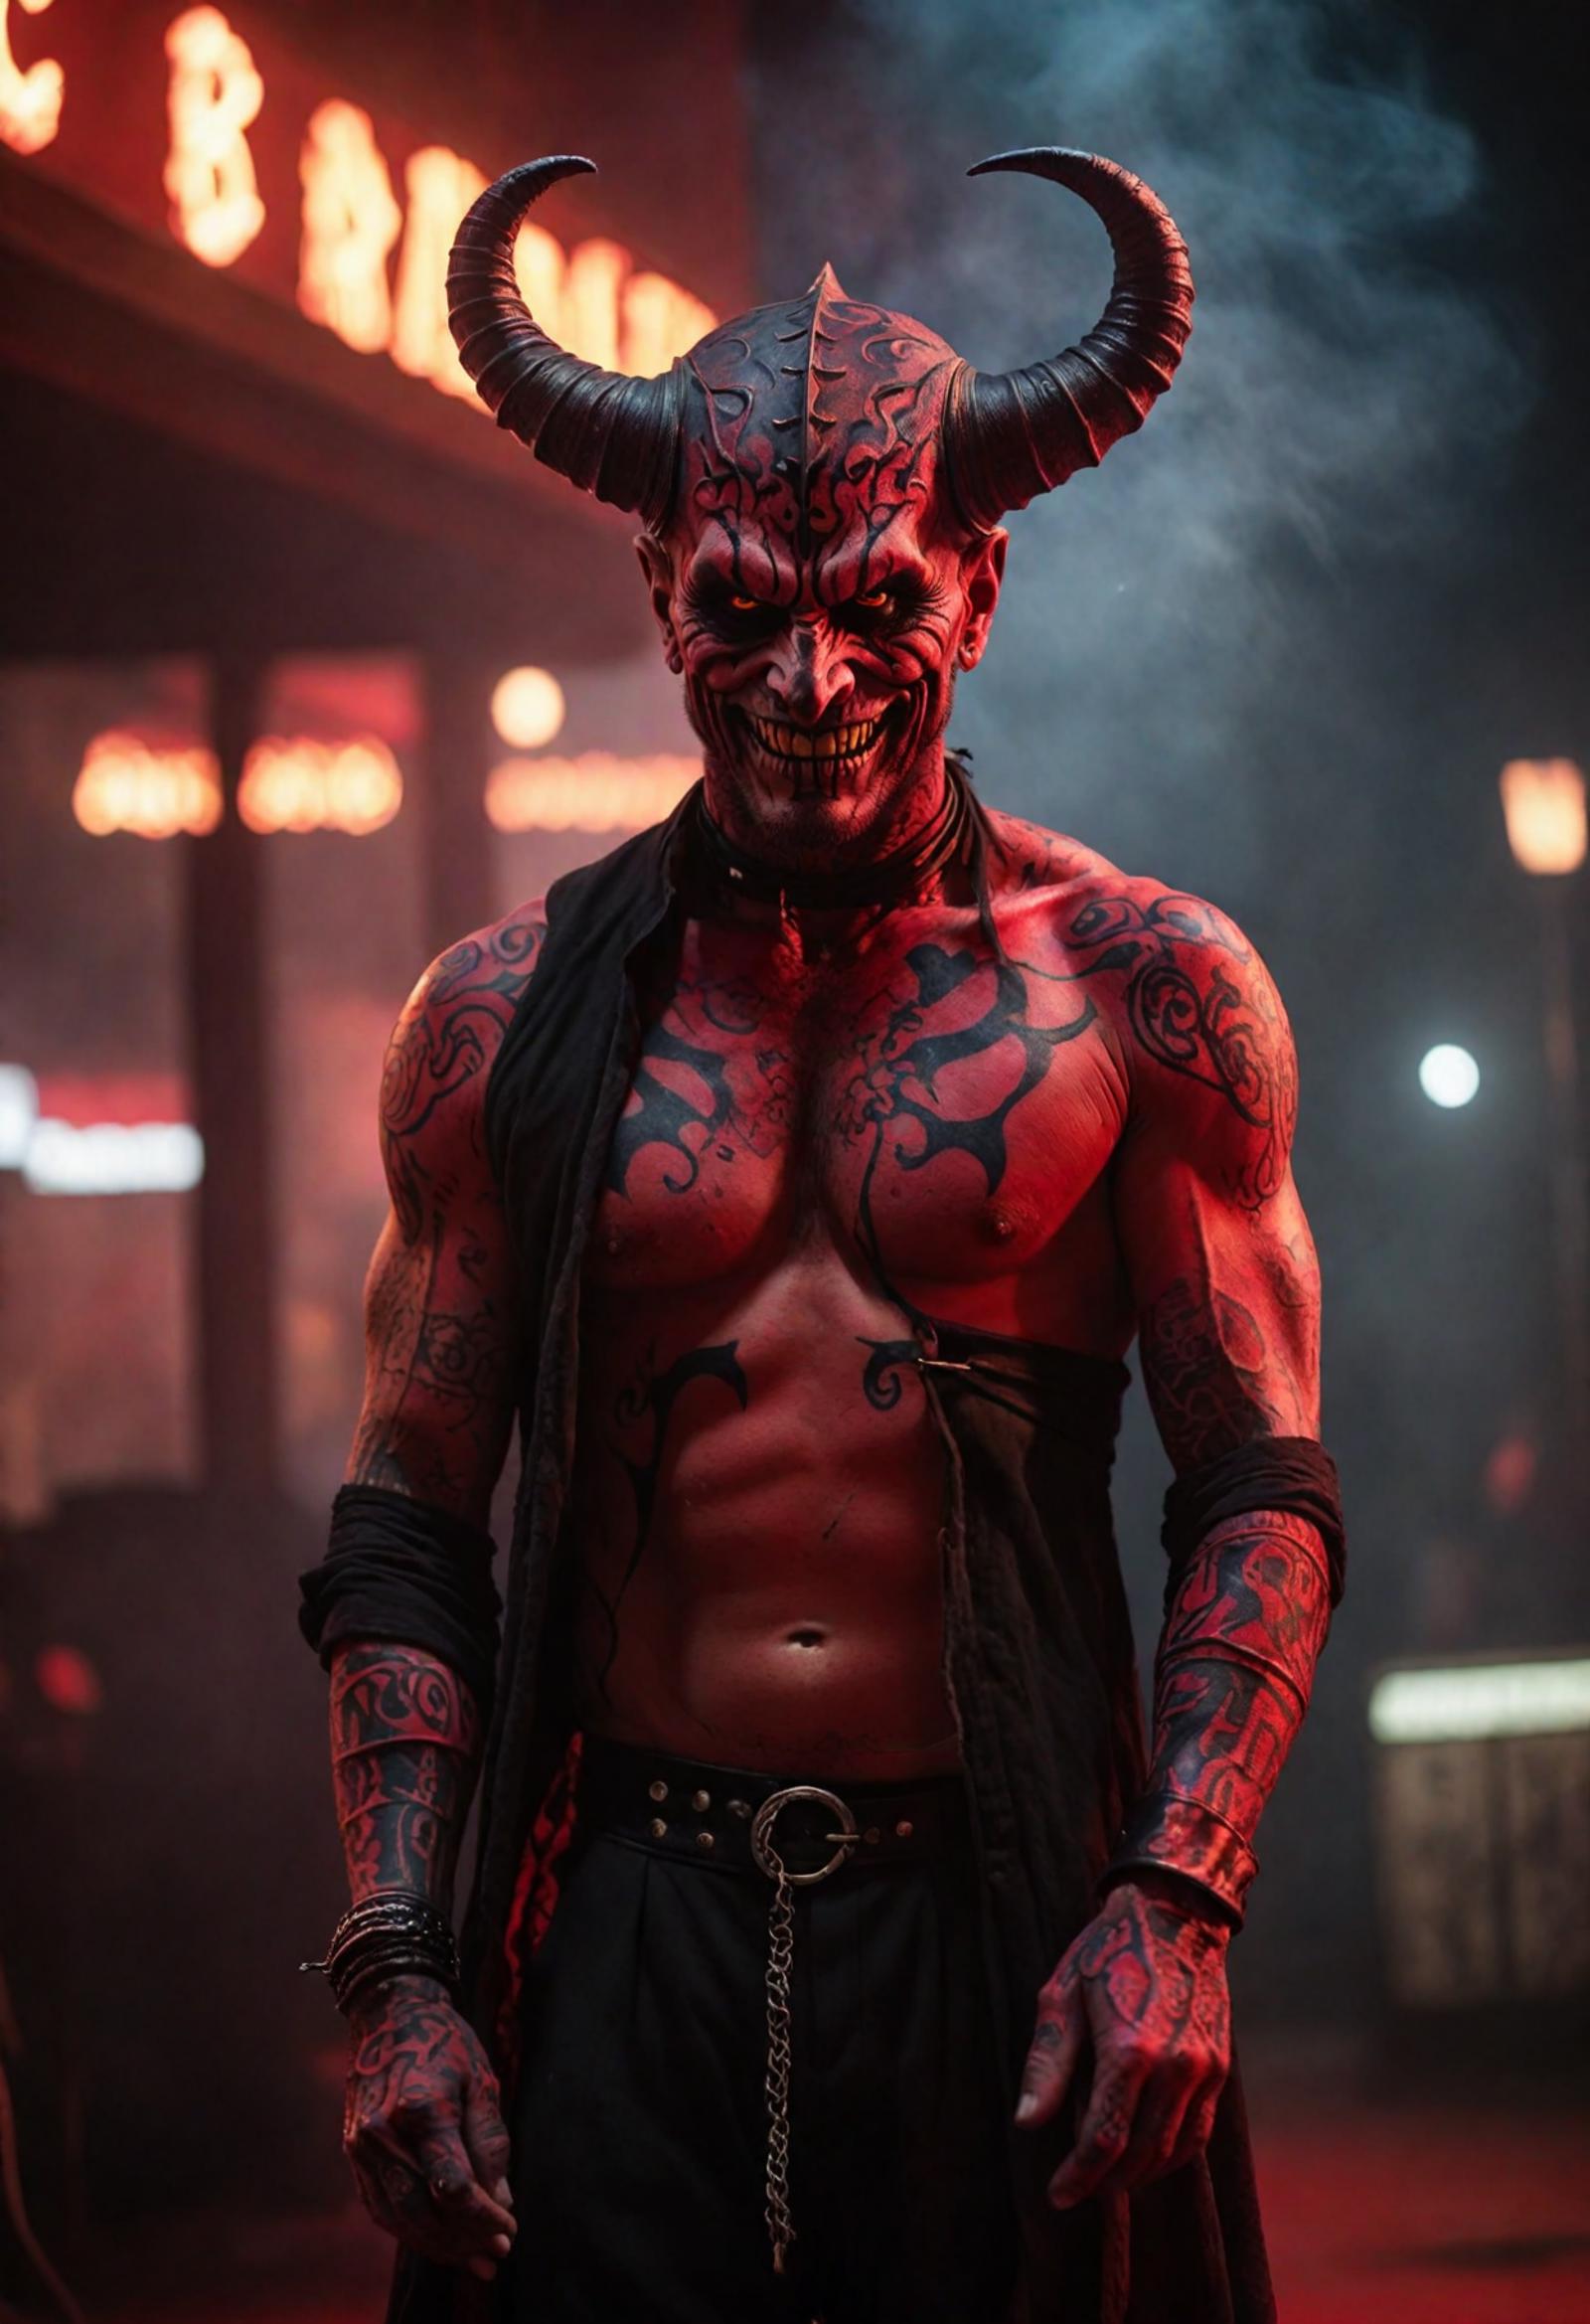 A man with horns and tattoos wearing black and red clothing.